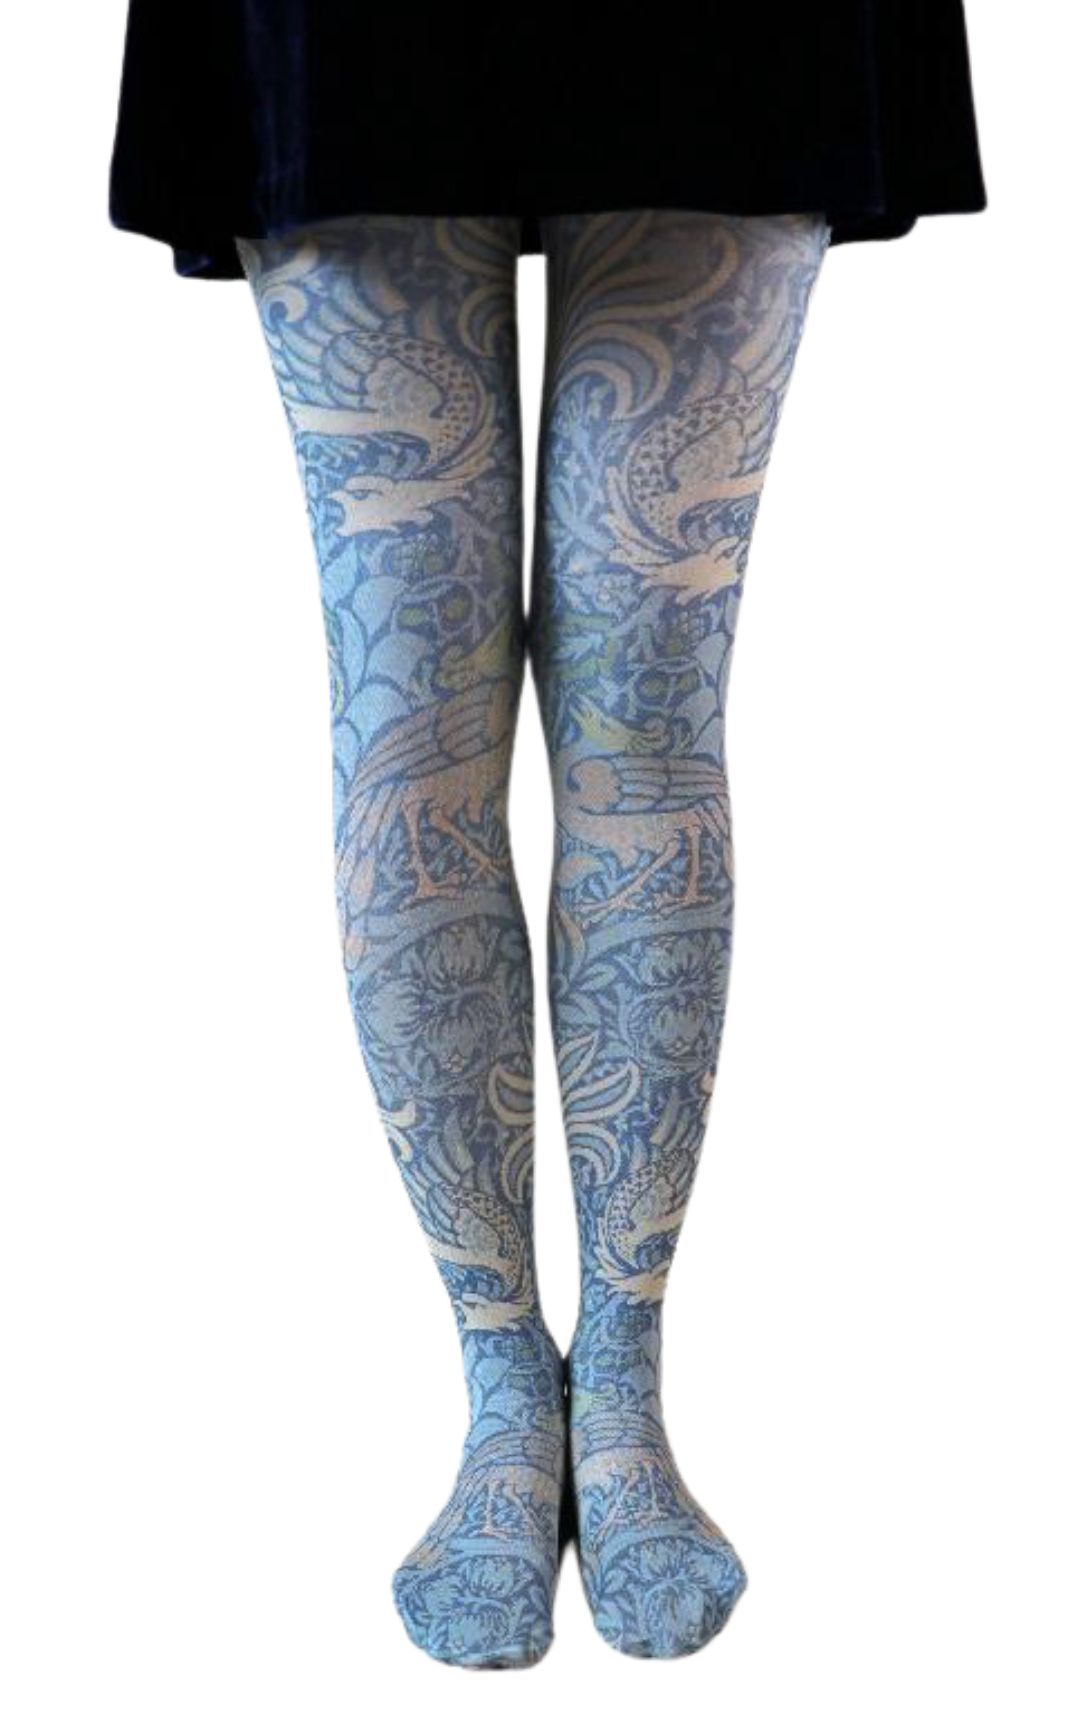 5846 dragon tights by william morris